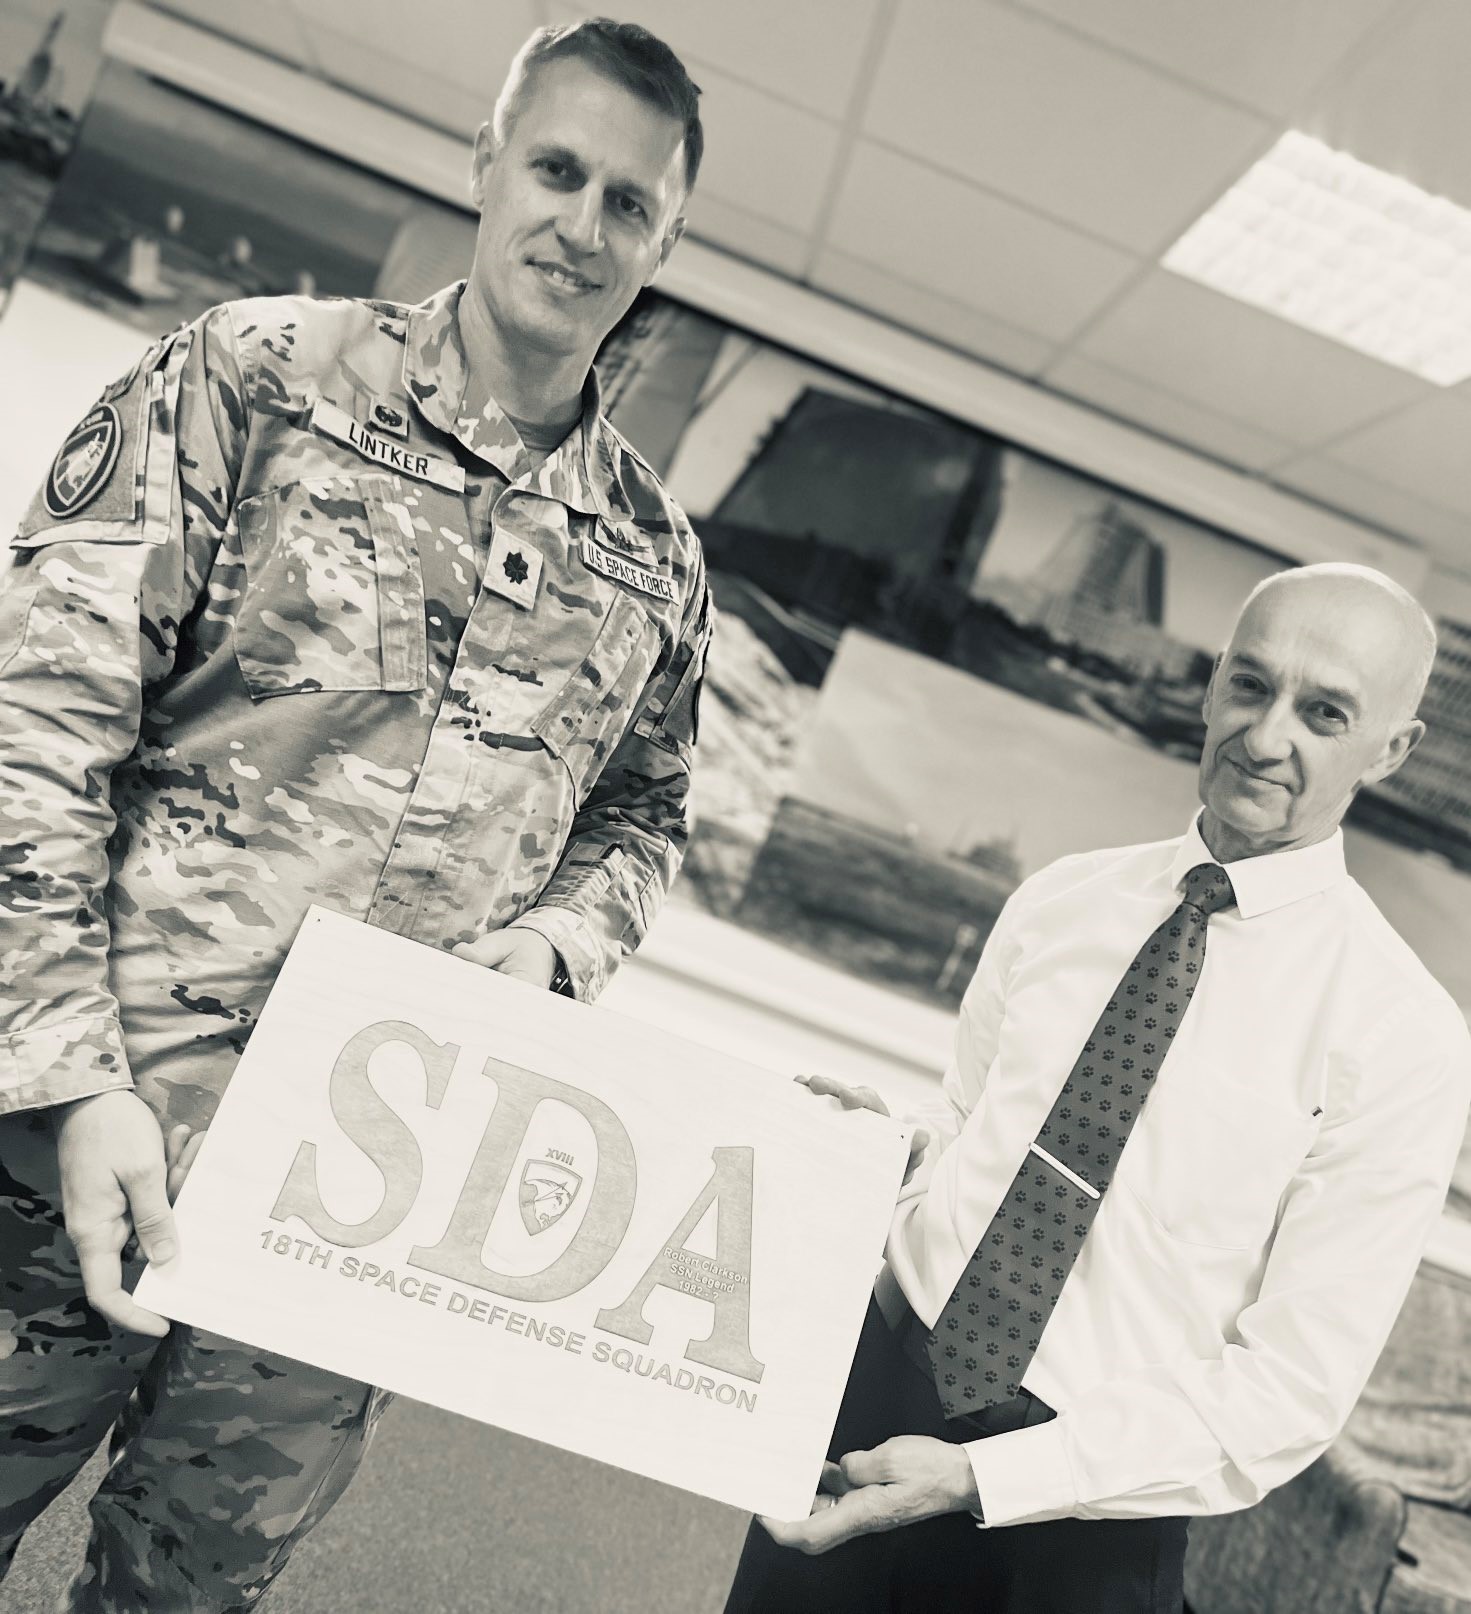 Black and white image shows RAF aviator and civilian holding a Space Defence Squadron sign. 